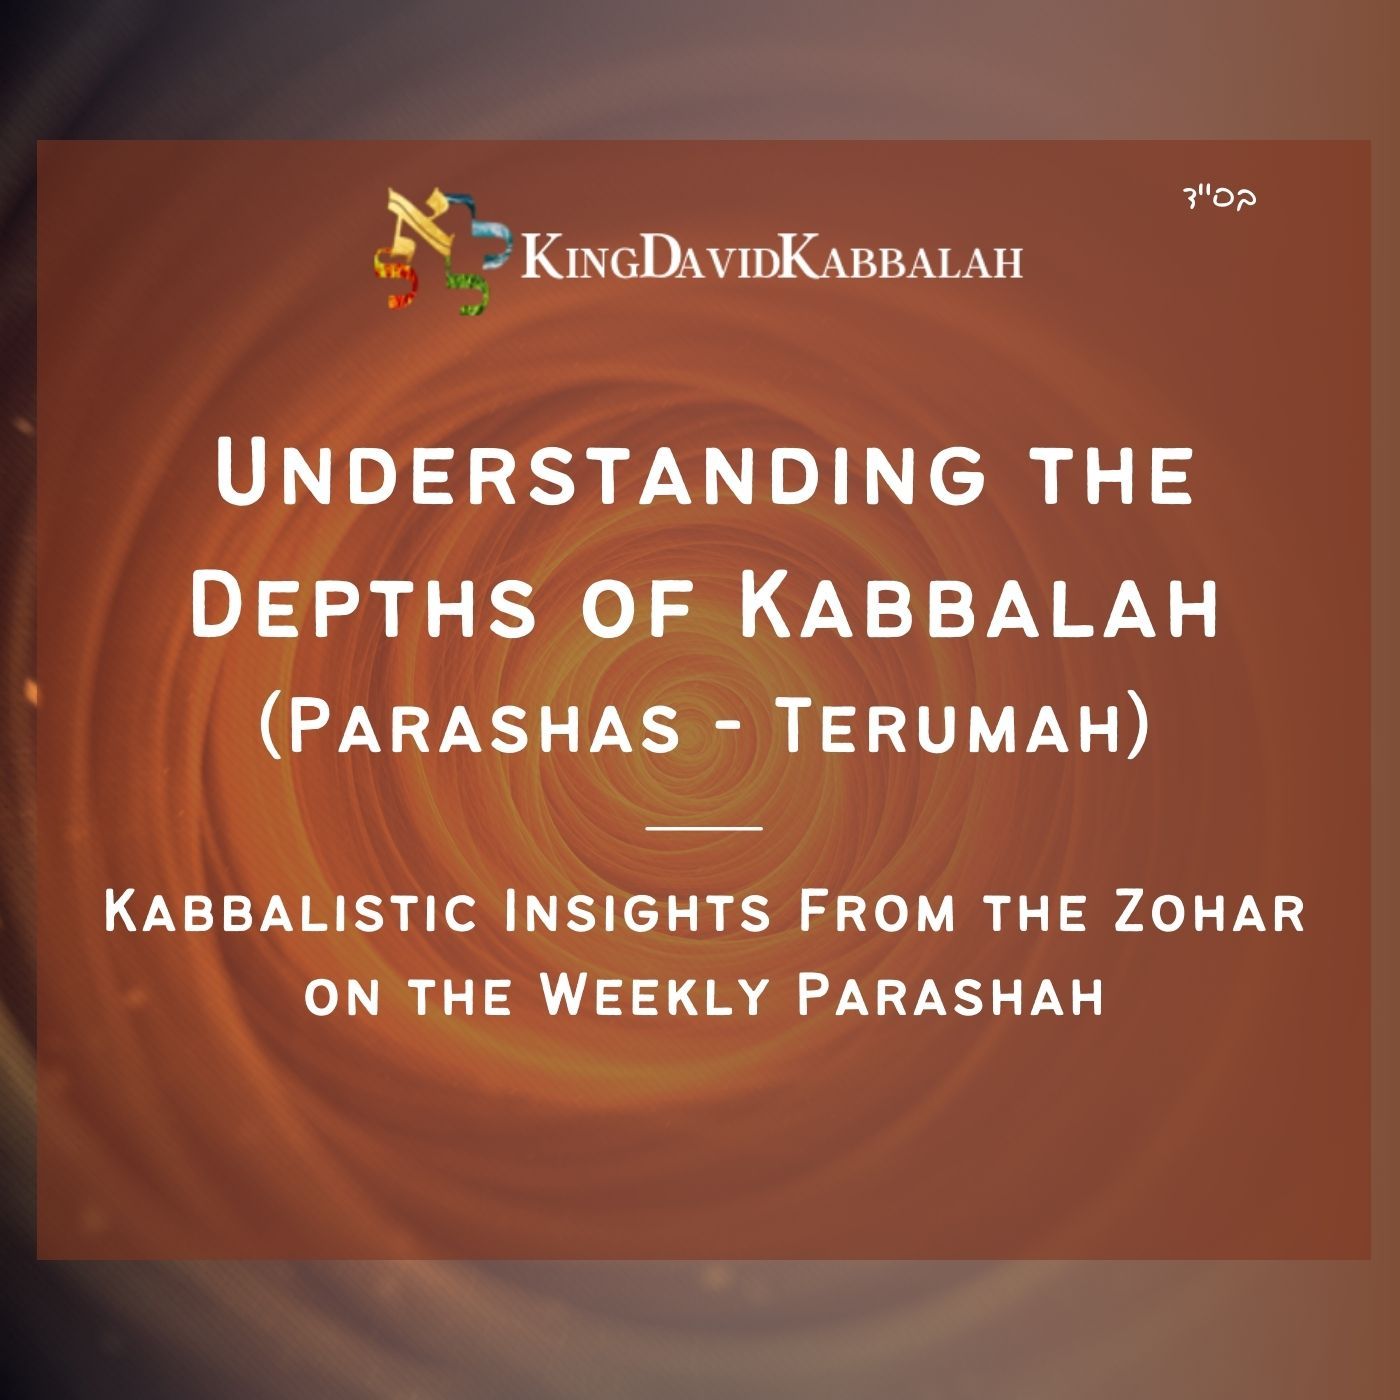 Understanding the Depths of Kabbalah  - Kabbalistic Inspiration on the Parasha from the Zohar